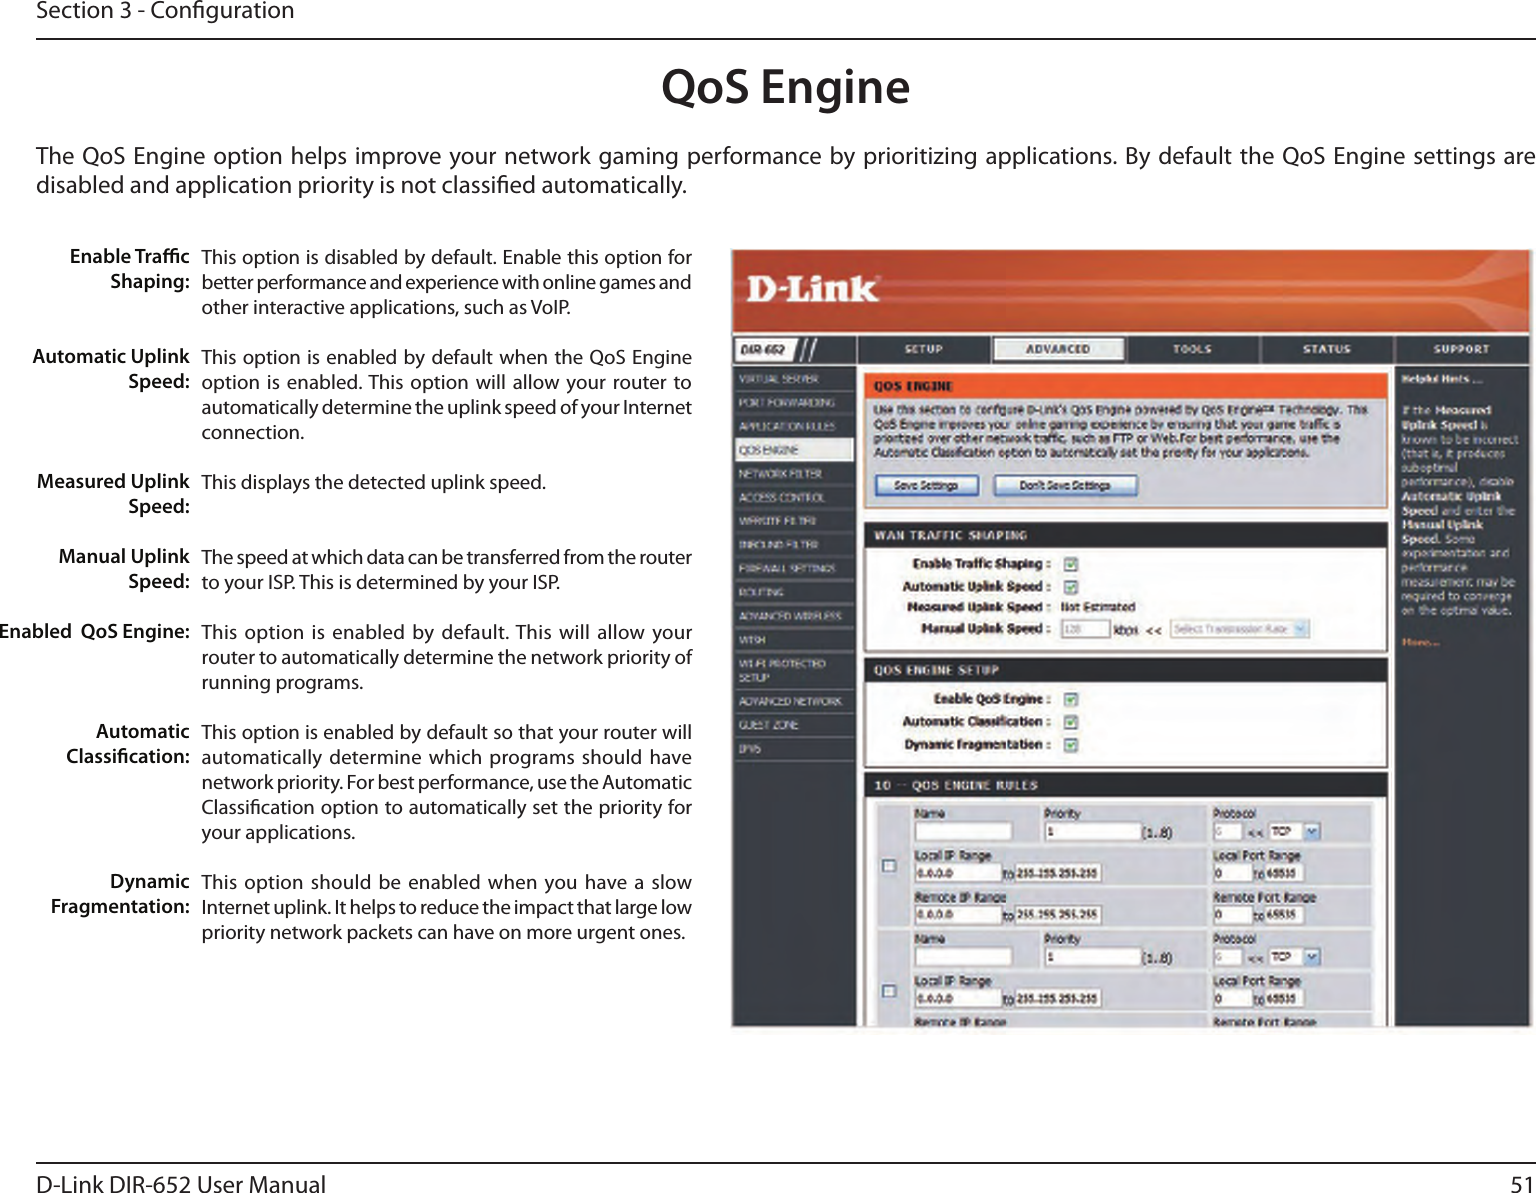 51D-Link DIR-652 User ManualSection 3 - CongurationQoS EngineThe QoS Engine option helps improve your network gaming performance by prioritizing applications. By default the QoS Engine settings are disabled and application priority is not classied automatically.This option is disabled by default. Enable this option for better performance and experience with online games and other interactive applications, such as VoIP.This option is enabled by default when the QoS Engine option is  enabled. This option  will allow your router to automatically determine the uplink speed of your Internet connection.This displays the detected uplink speed.The speed at which data can be transferred from the router to your ISP. This is determined by your ISP. This option is enabled  by default. This will allow  your router to automatically determine the network priority of running programs.This option is enabled by default so that your router will automatically determine which  programs should have network priority. For best performance, use the Automatic Classication option to automatically set the priority for your applications.This option should be  enabled when you have a  slow Internet uplink. It helps to reduce the impact that large low priority network packets can have on more urgent ones.Enable TracShaping:Automatic UplinkSpeed:Measured UplinkSpeed:Manual UplinkSpeed:Enabled  QoS Engine:Automatic Classication:Dynamic Fragmentation: